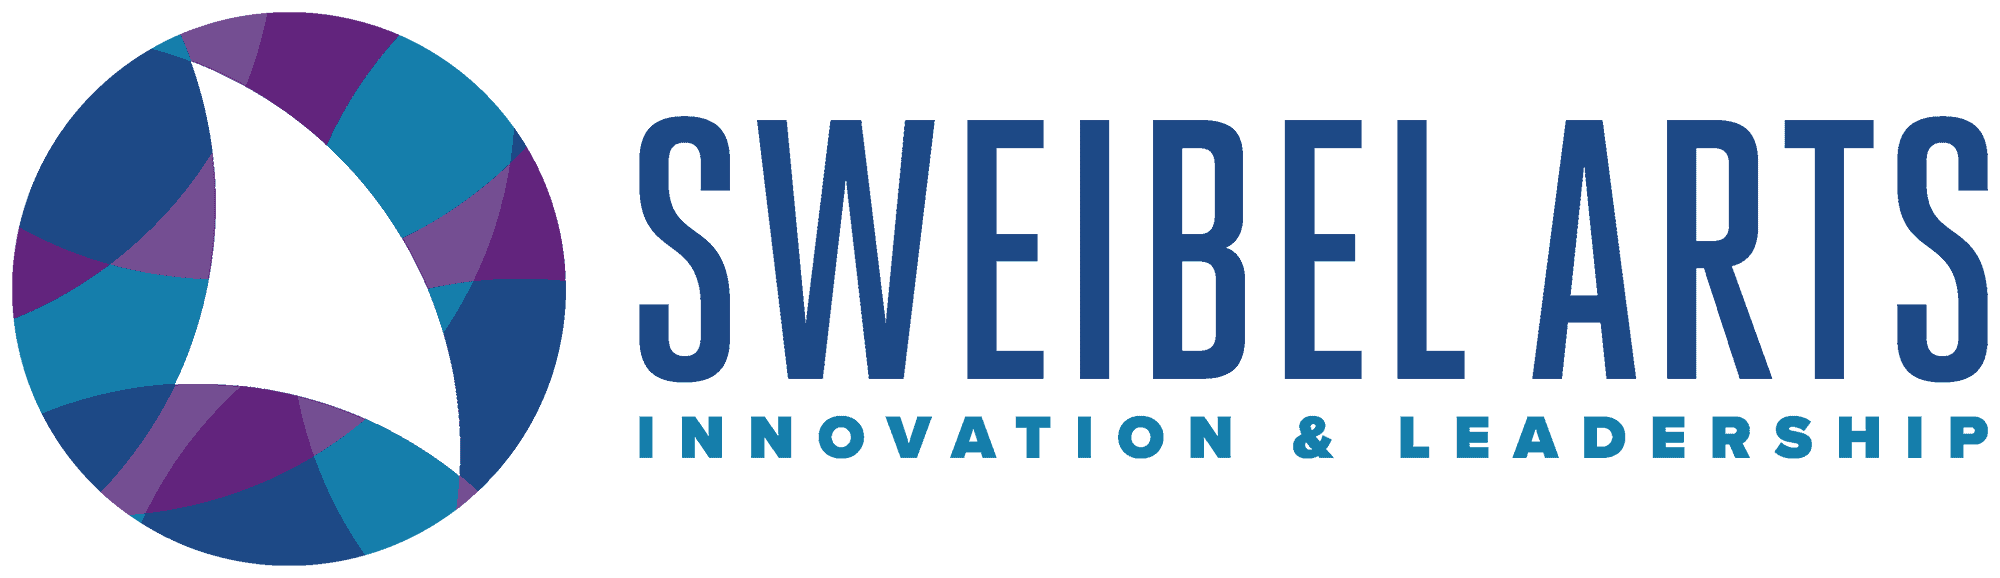 Logo for Sweibel Arts Innovation and Leadership, a circle with overlapping circles within it, creating multihued curved segments like waves in blues and purples, with several segments combined into a white sail filled with air, next to "SWEIBEL ARTS INNOVATION & LEADERSHIP" in modern sans-serif typefaces